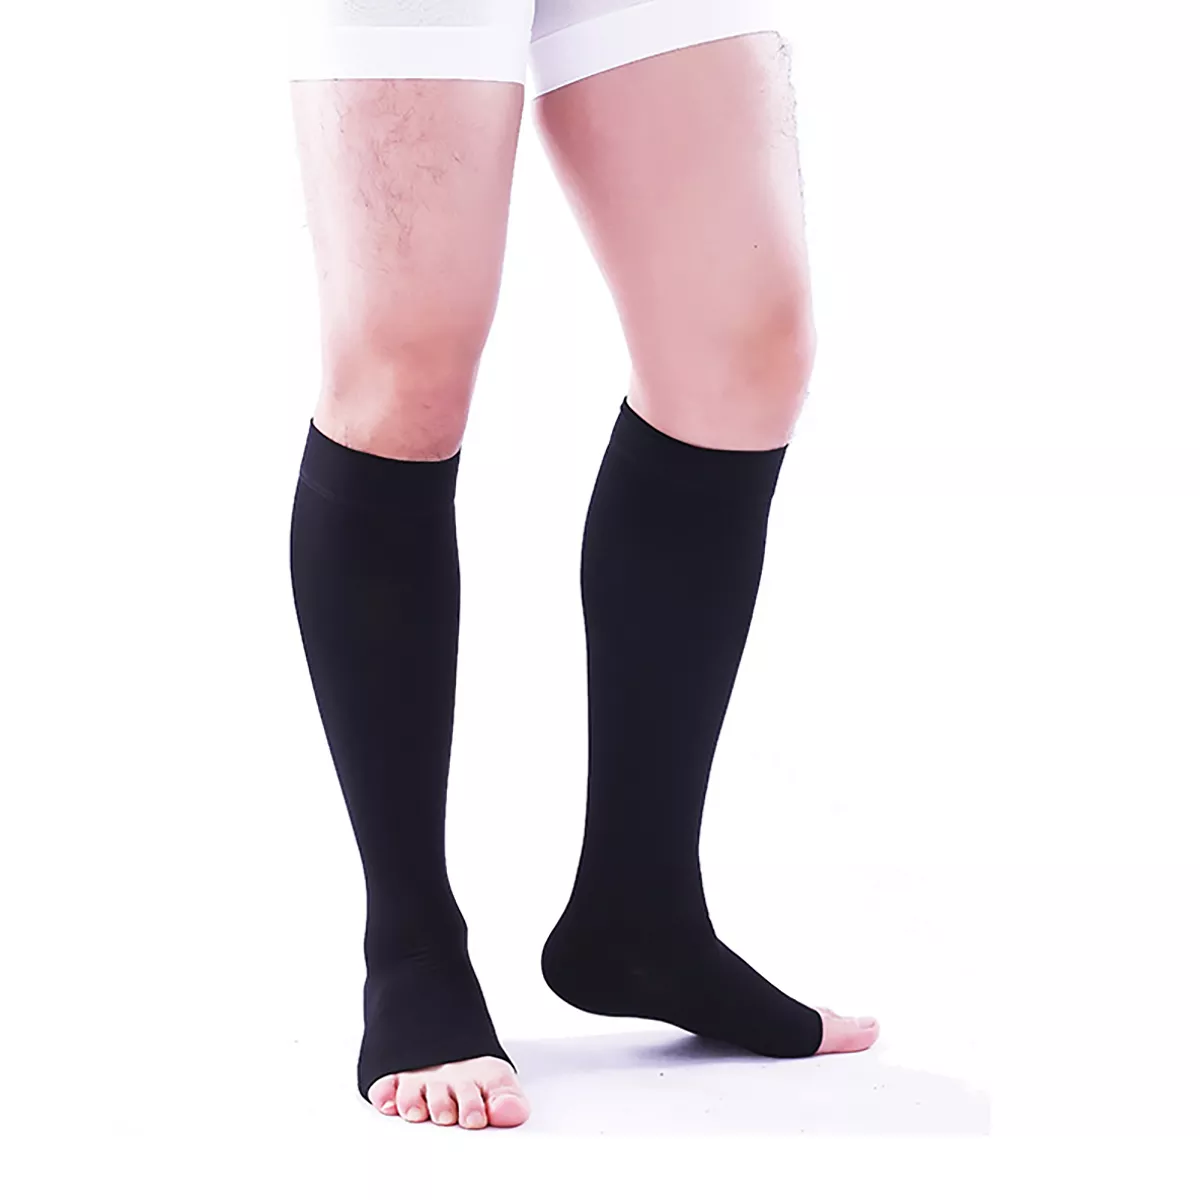 Thigh High Compression Stockings Open Toe Pair Firm Support 20-30mmHg  Gradient Compression Socks with Silicone Band Unisex Opaque Best for Spider  & Varicose Veins Edema Swelling Black M Medium Black